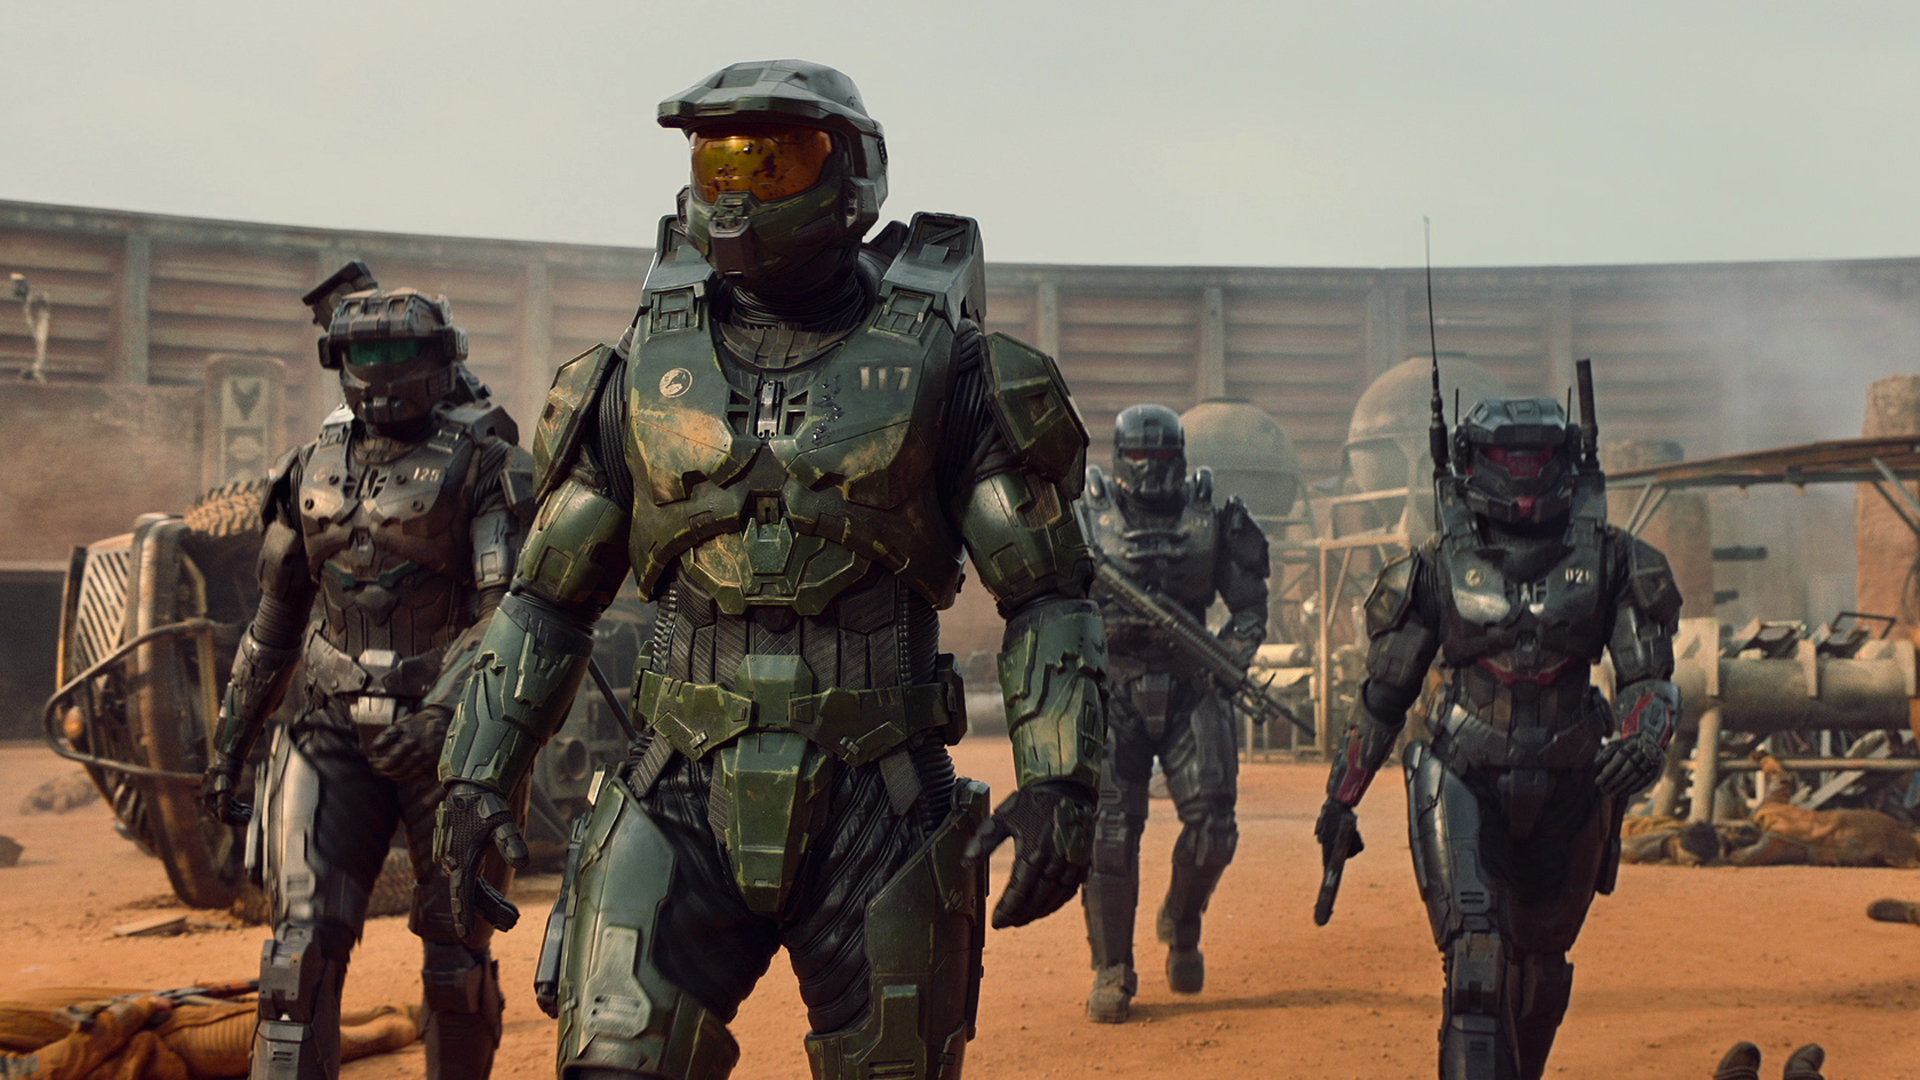 Master Chief leads Silver Team on a mission in the Halo TV series